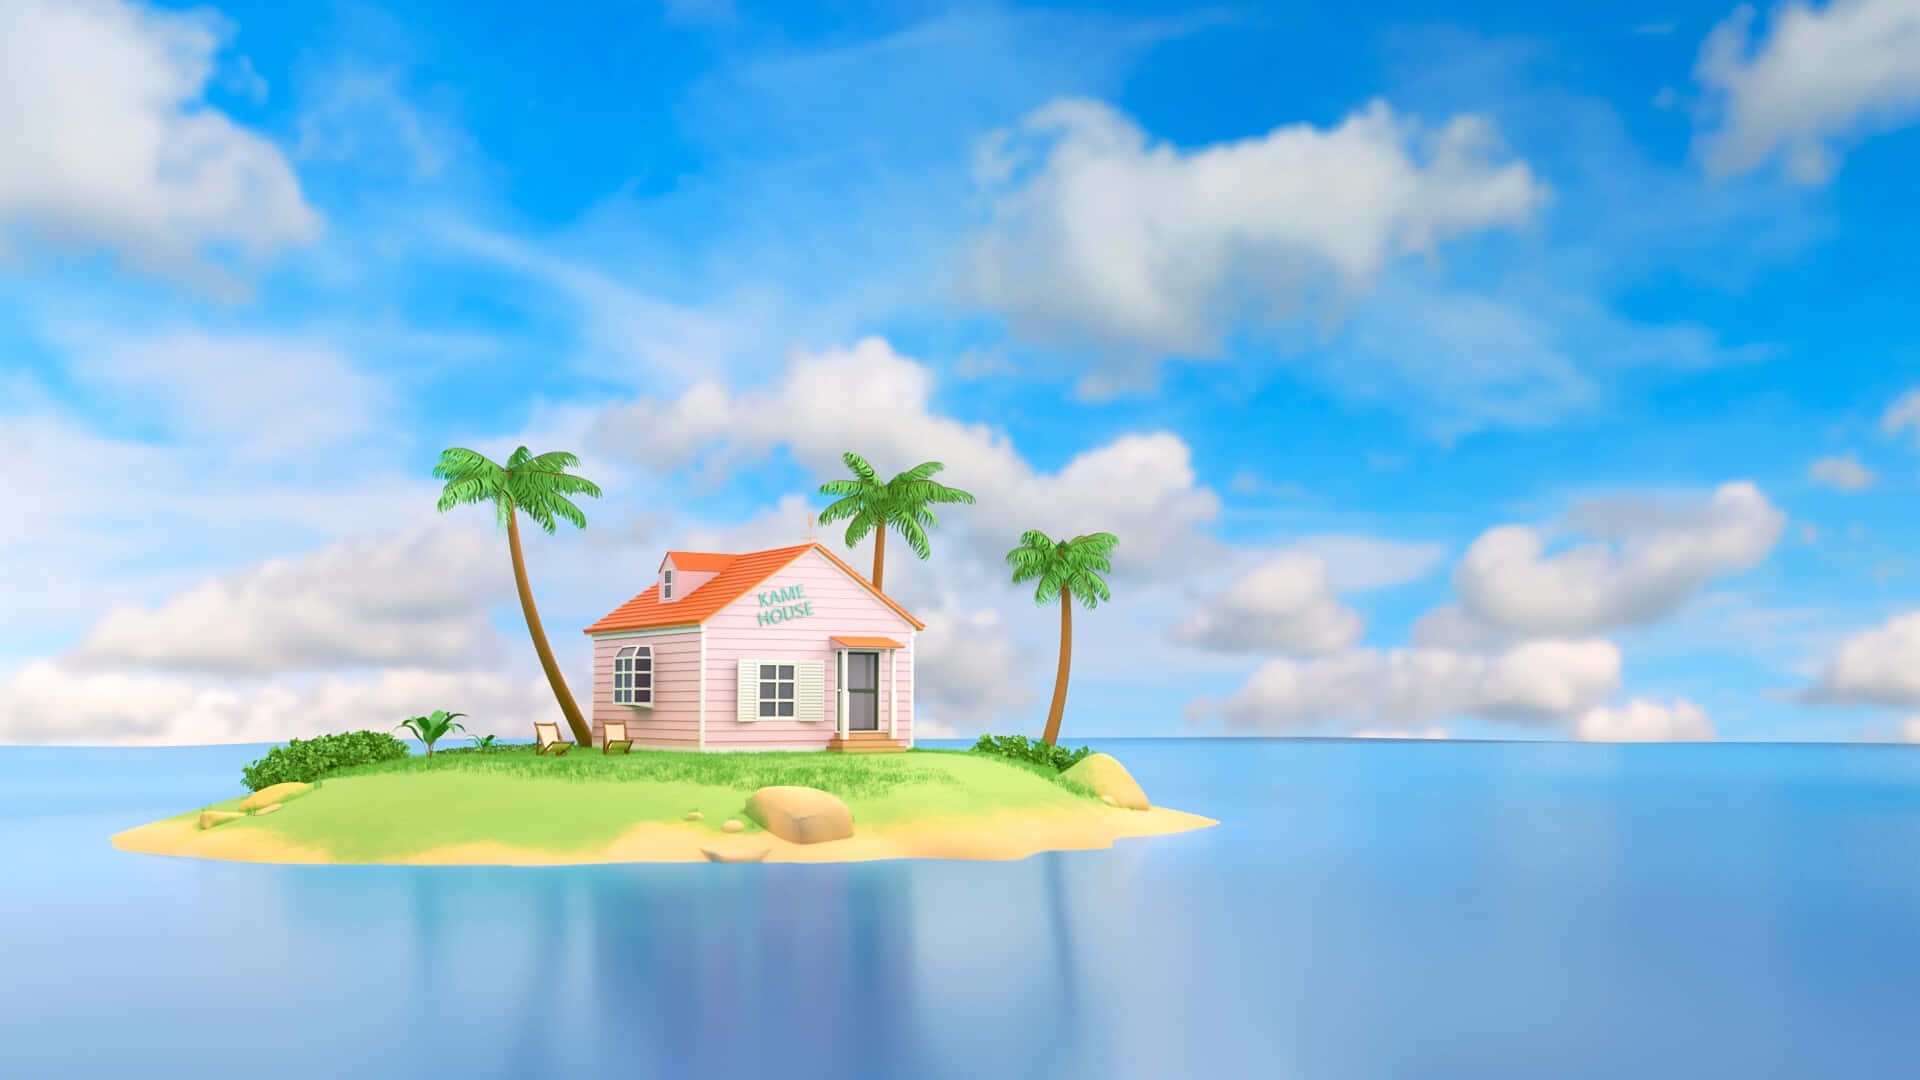 Welcome Home to Kame House Wallpaper